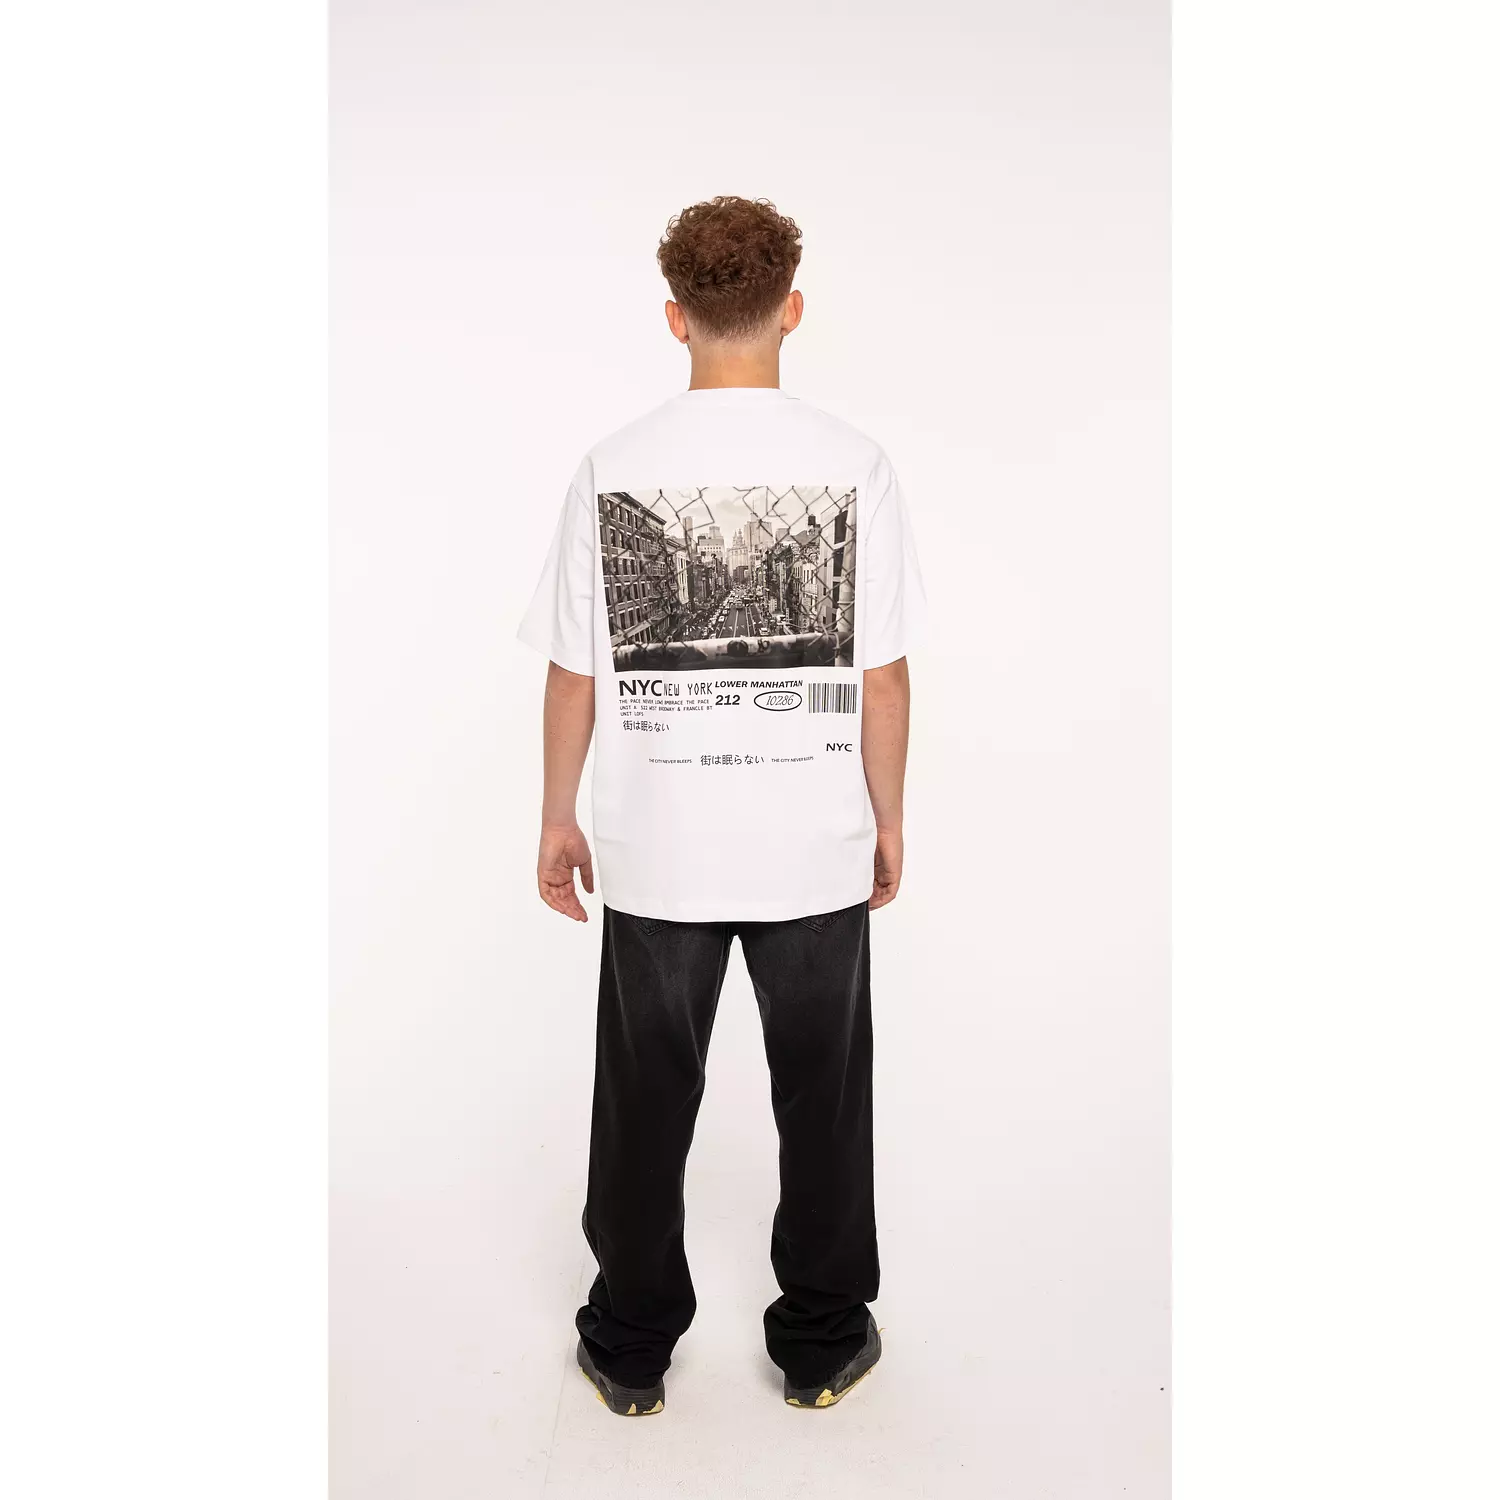 NYC oversized tee hover image